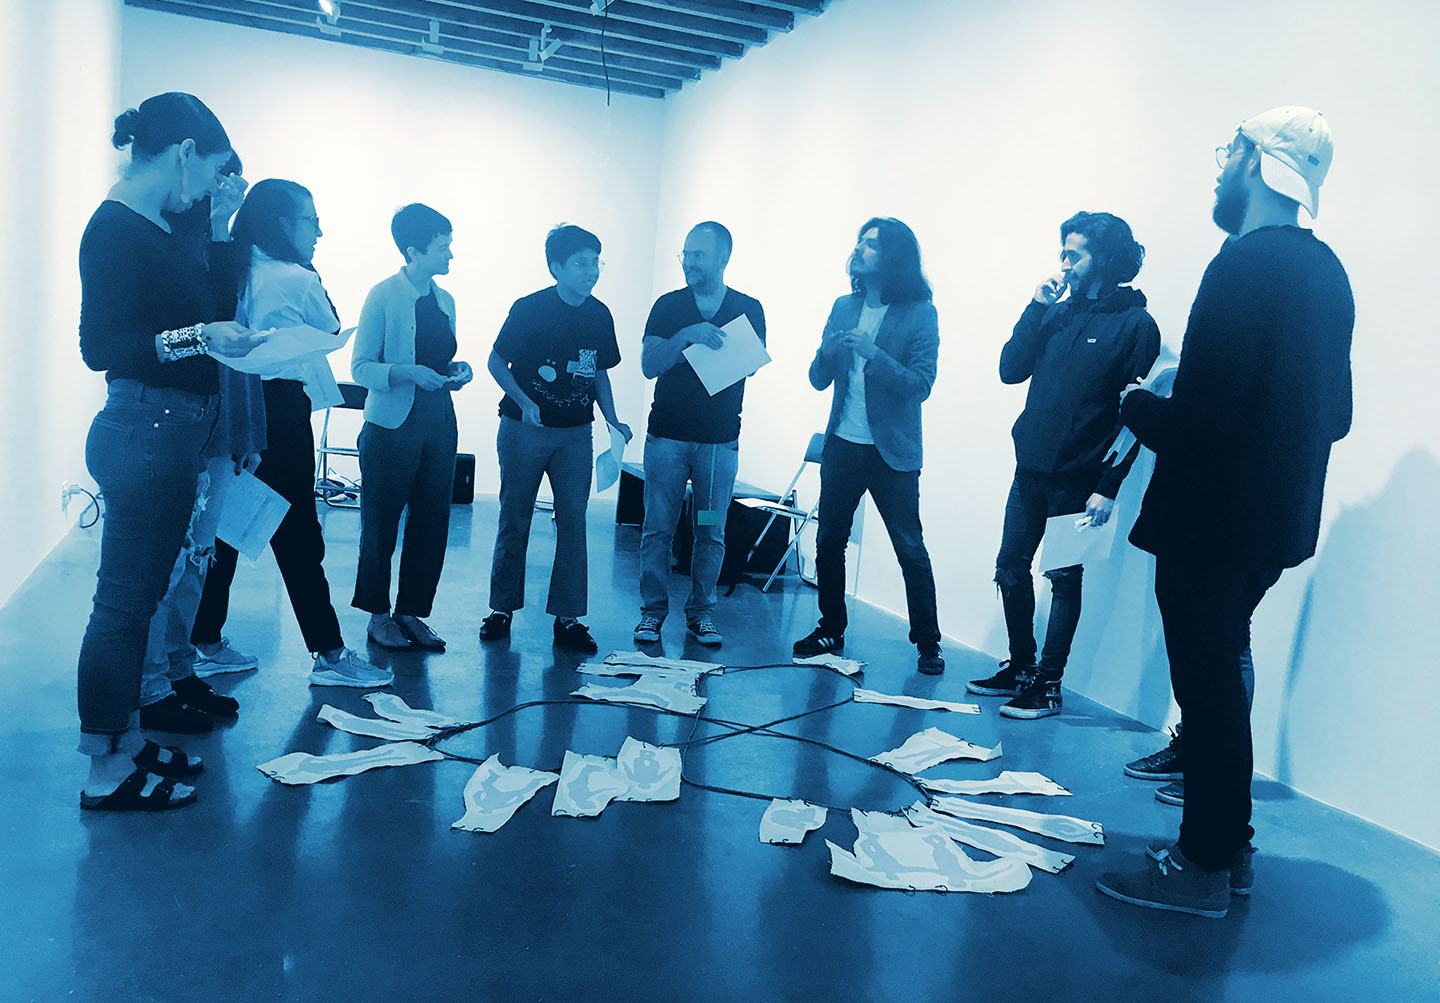 Ten people standing and speaking, in a semi-circle around a diagrammatic instrument on the ground. The diagrammatic instrument is a large trefoil knot on the ground that has images of people in various poses attached to it.